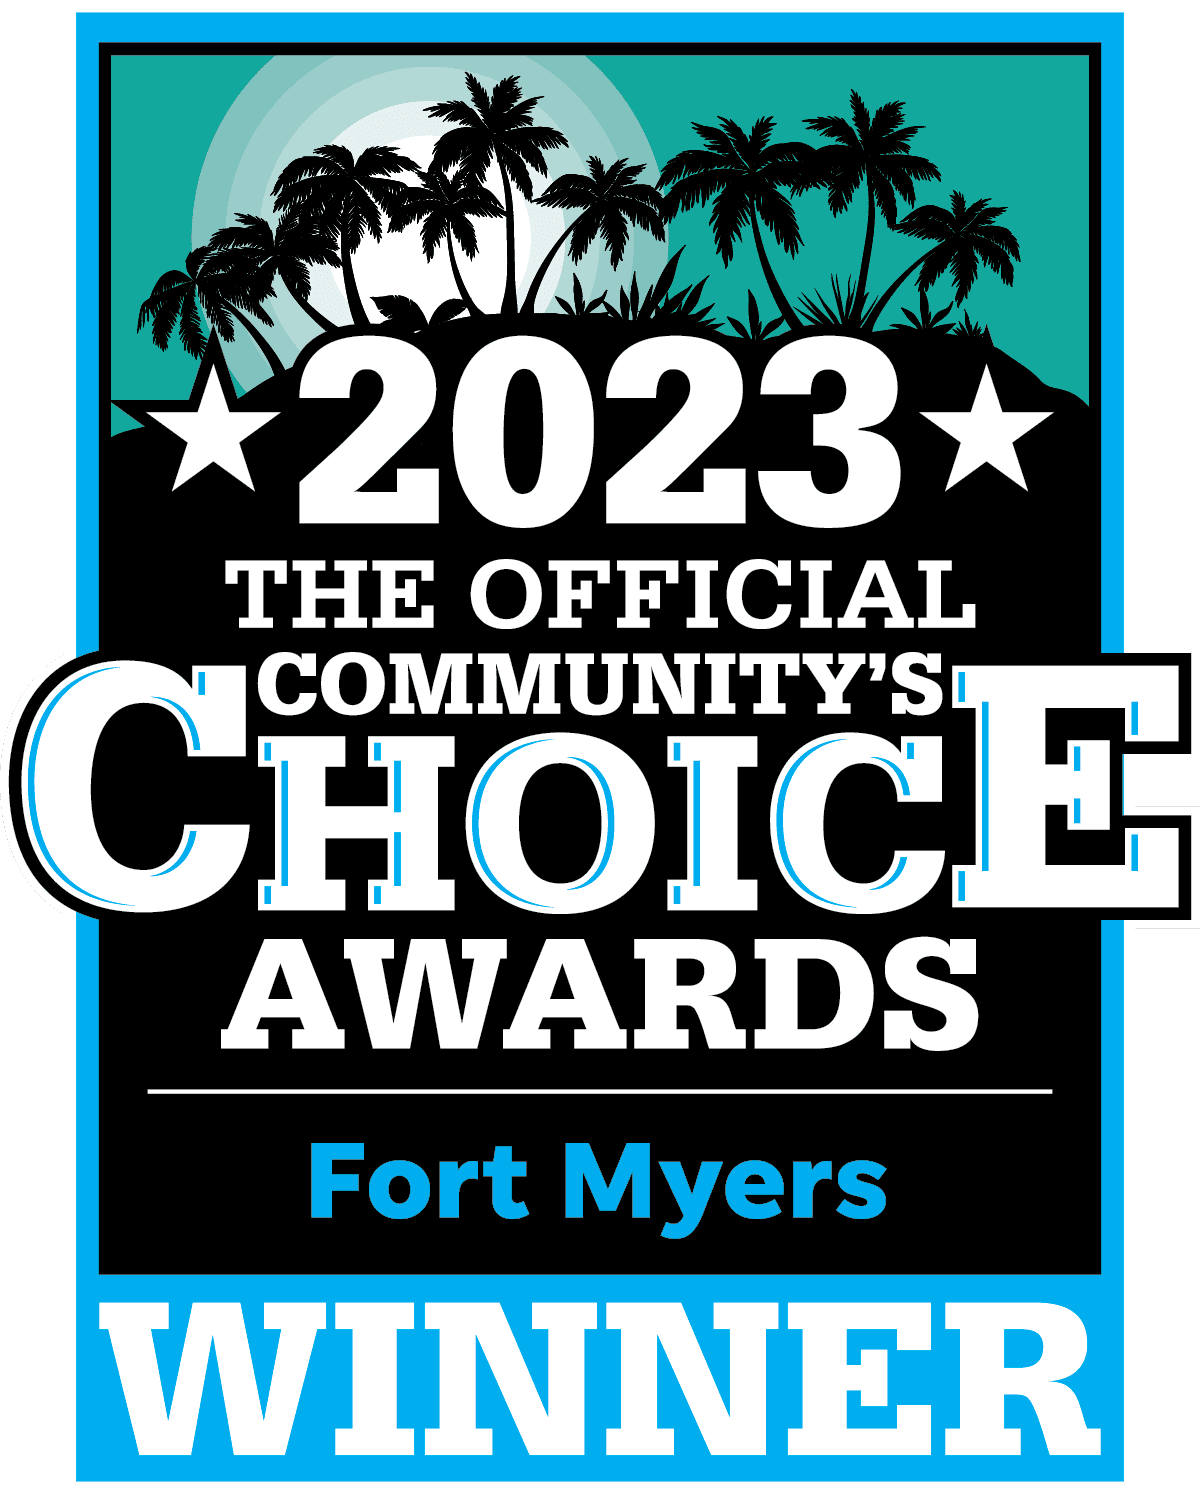 2023 - The official communality's choice awards winner - Fort Myers